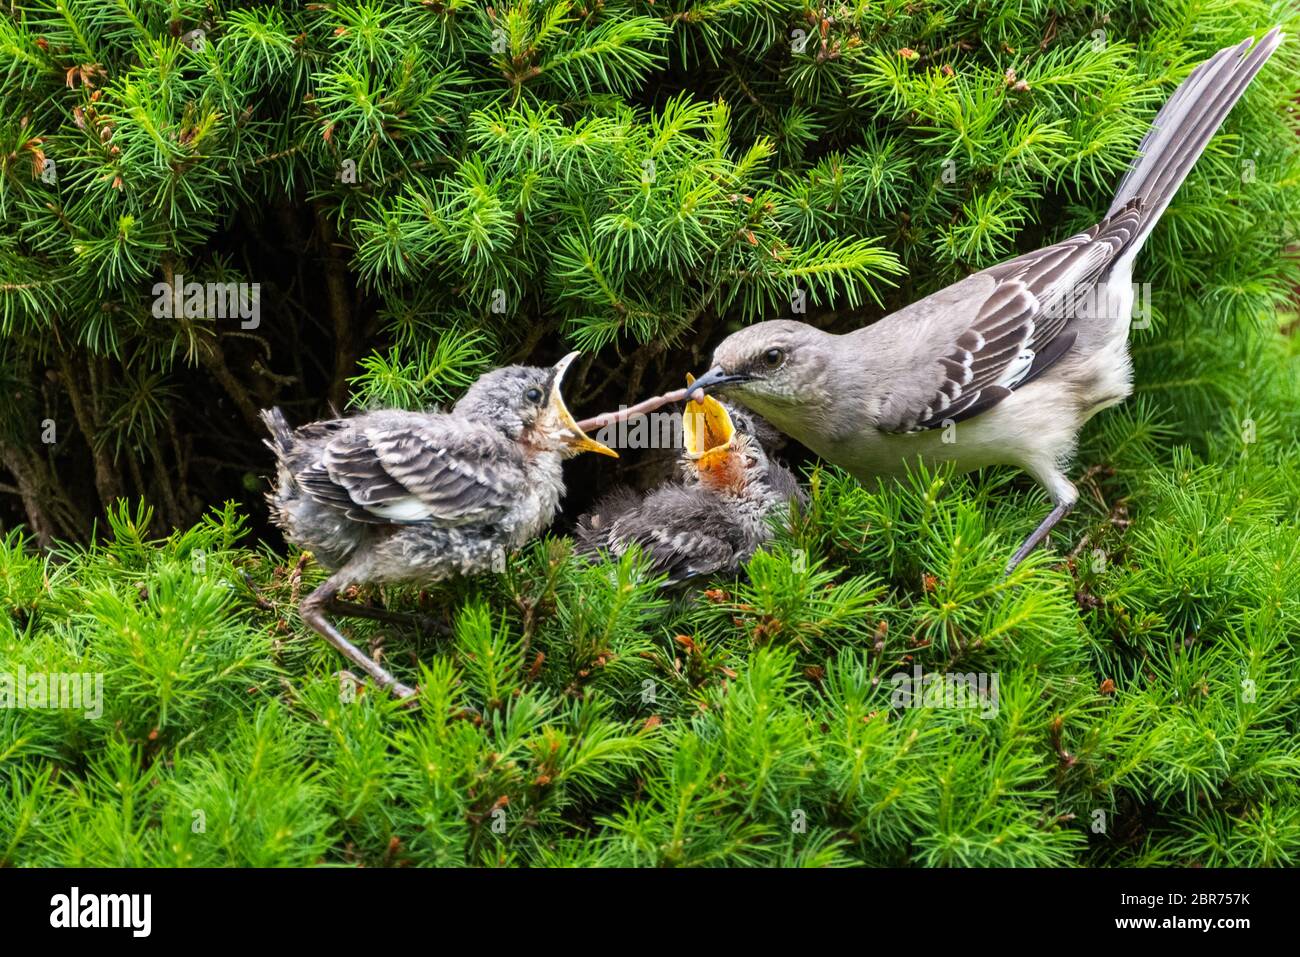 A female Mockingbird is feeding an earthworm to her young fledgling babies. Stock Photo